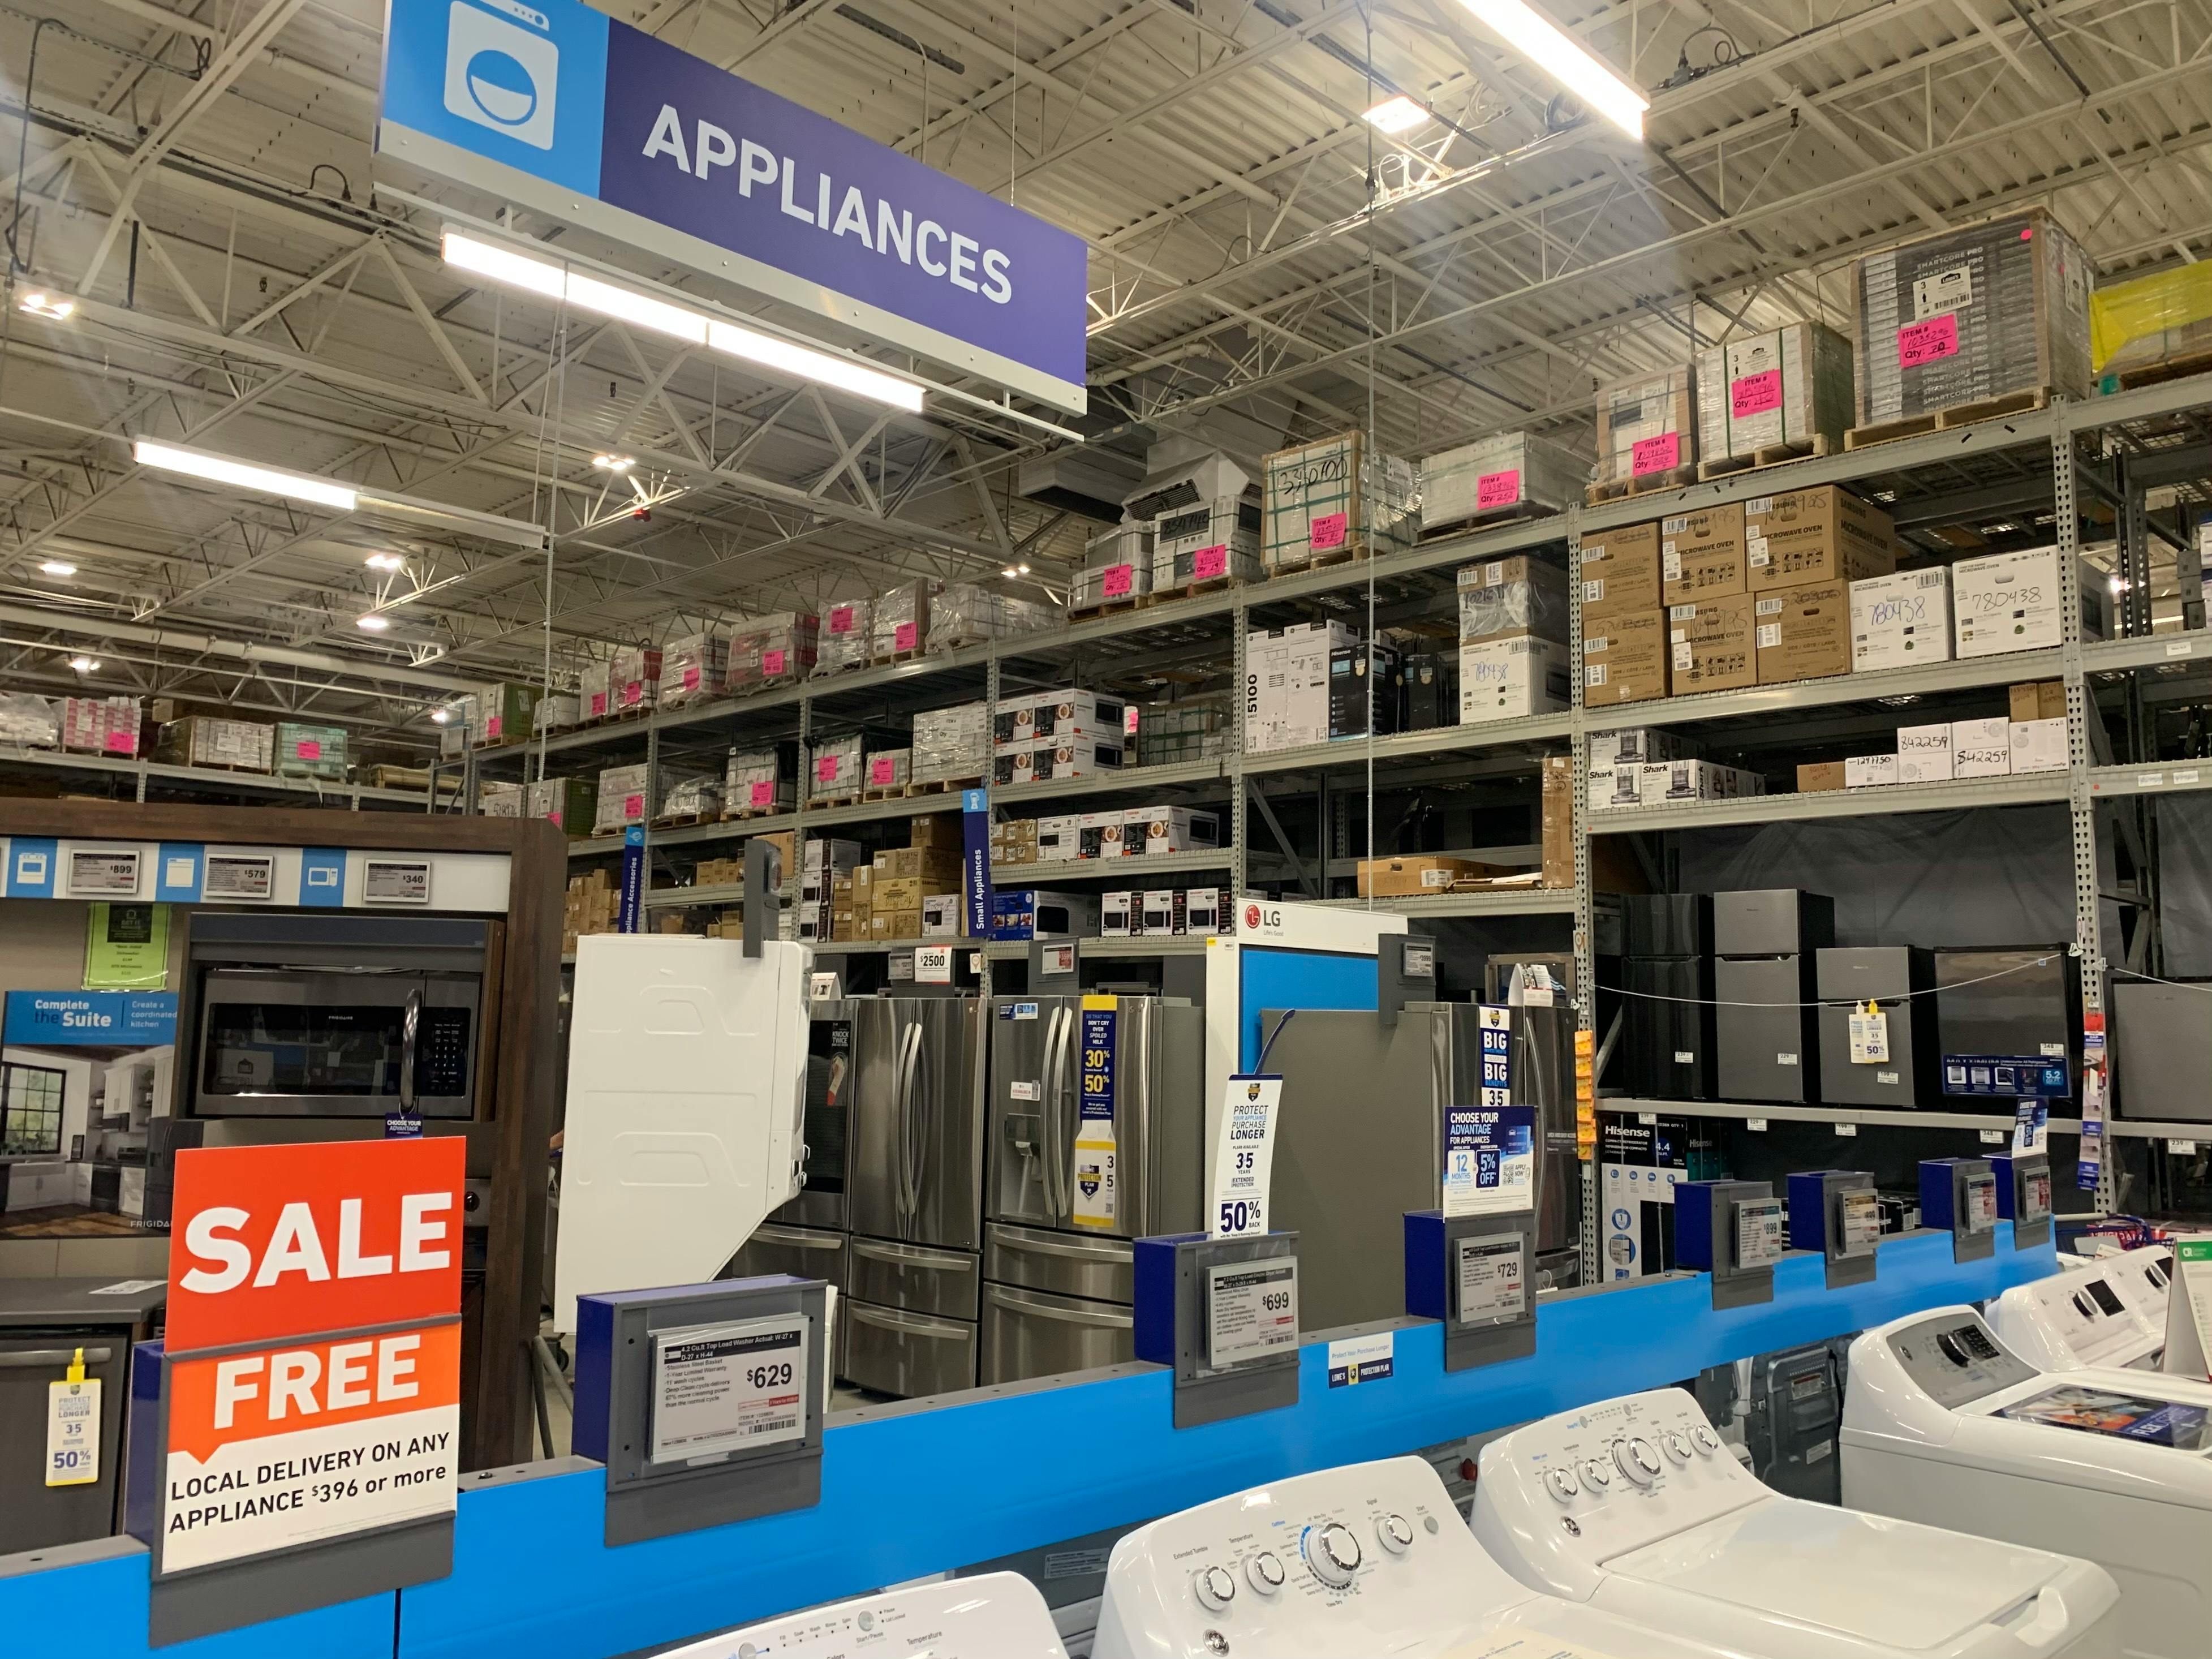 lowes appliance section in store with sale sign